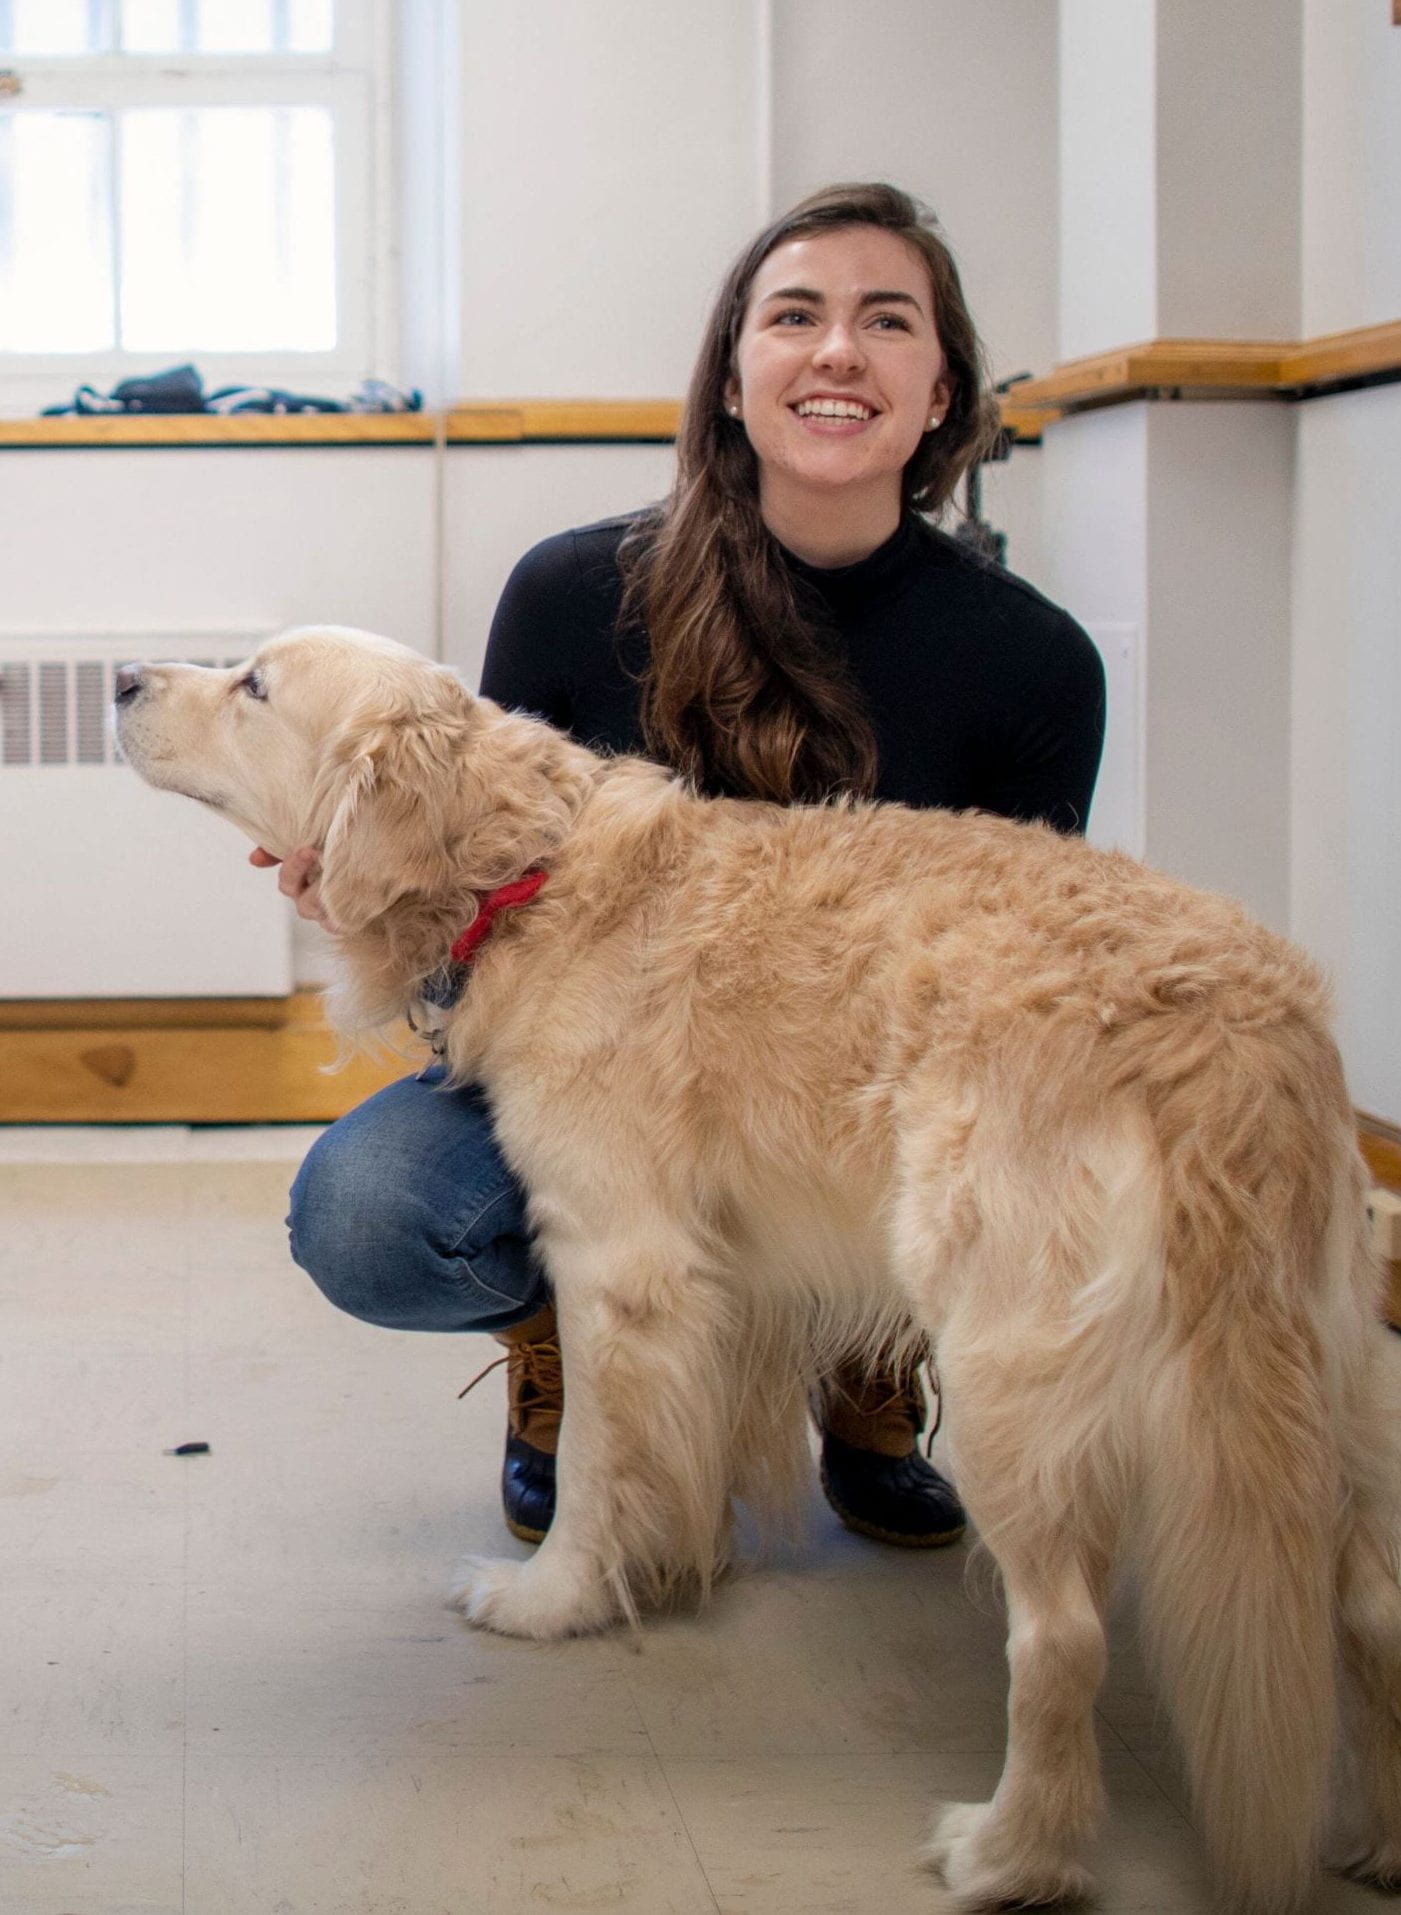 madeline pelgrim smiling and crouching down to pet a golden retriever